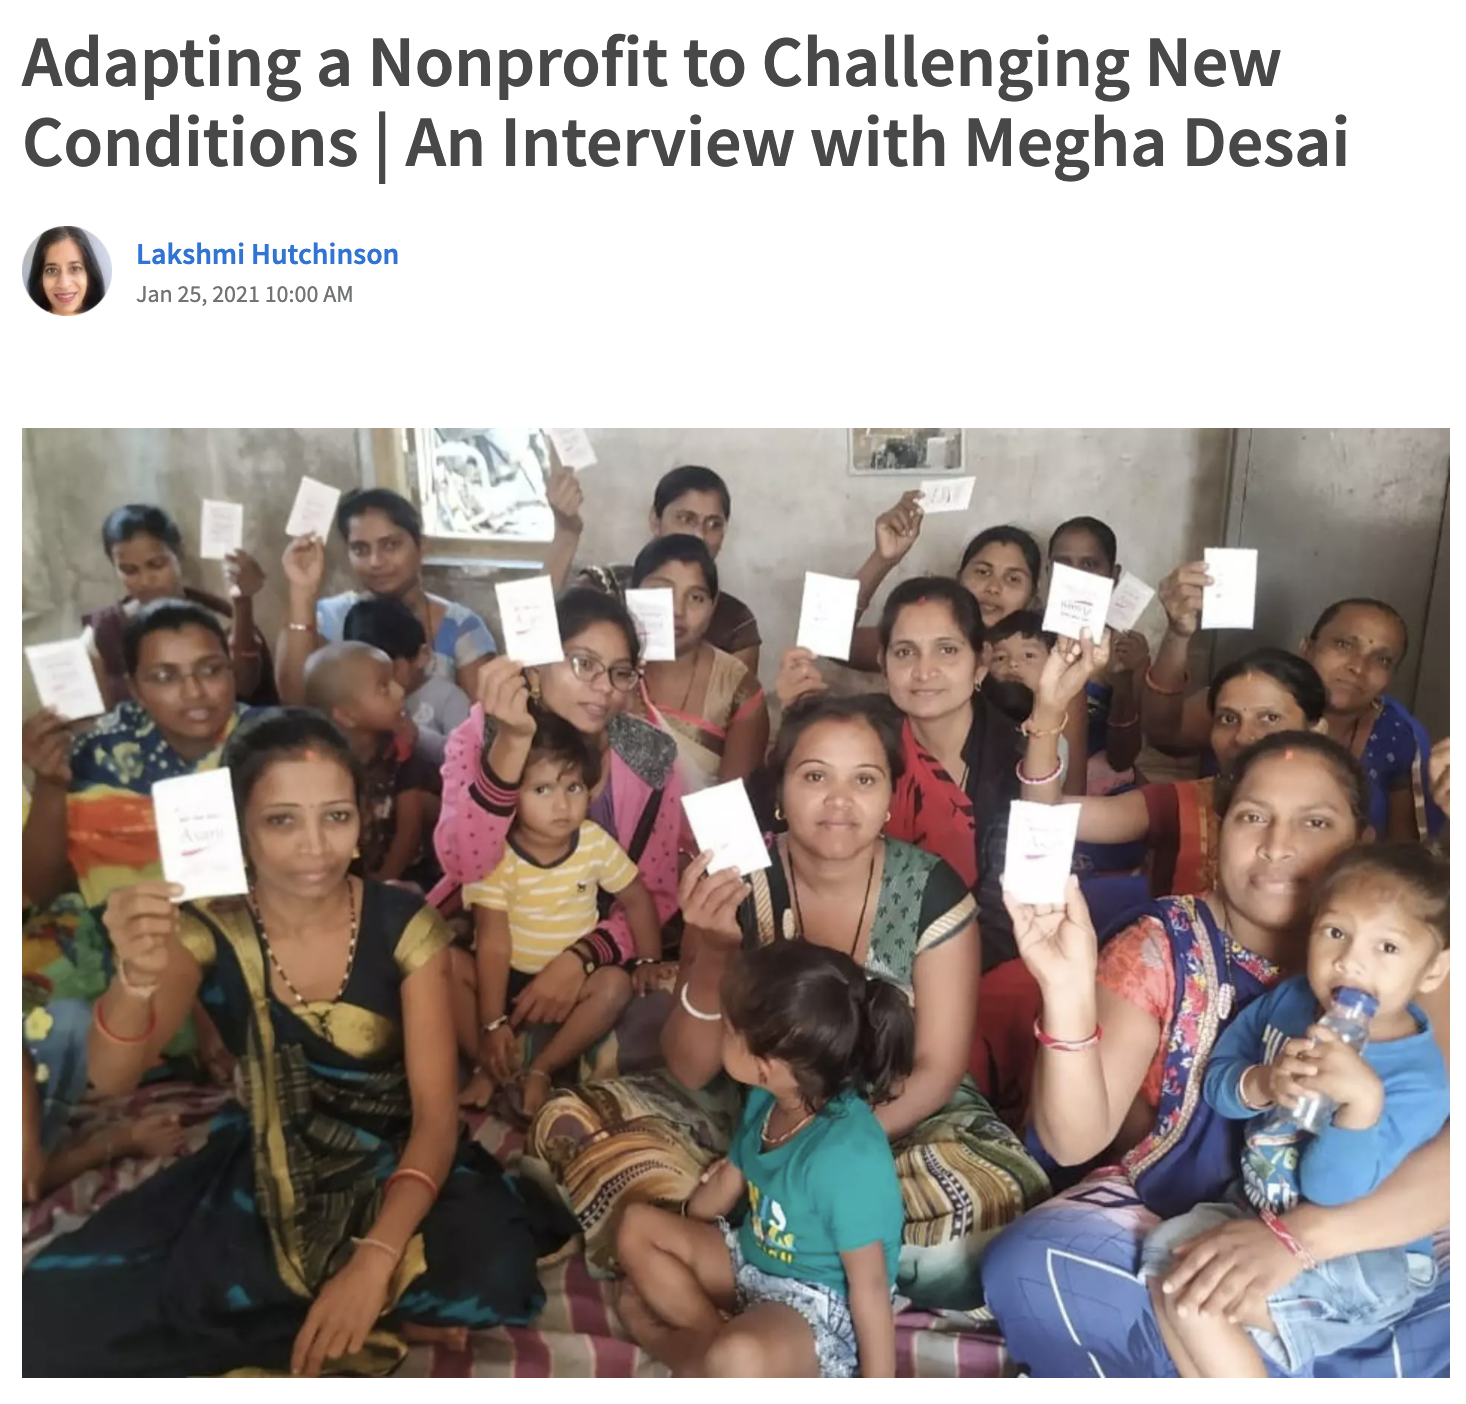 Adapting a Nonprofit to Challenging New Conditions